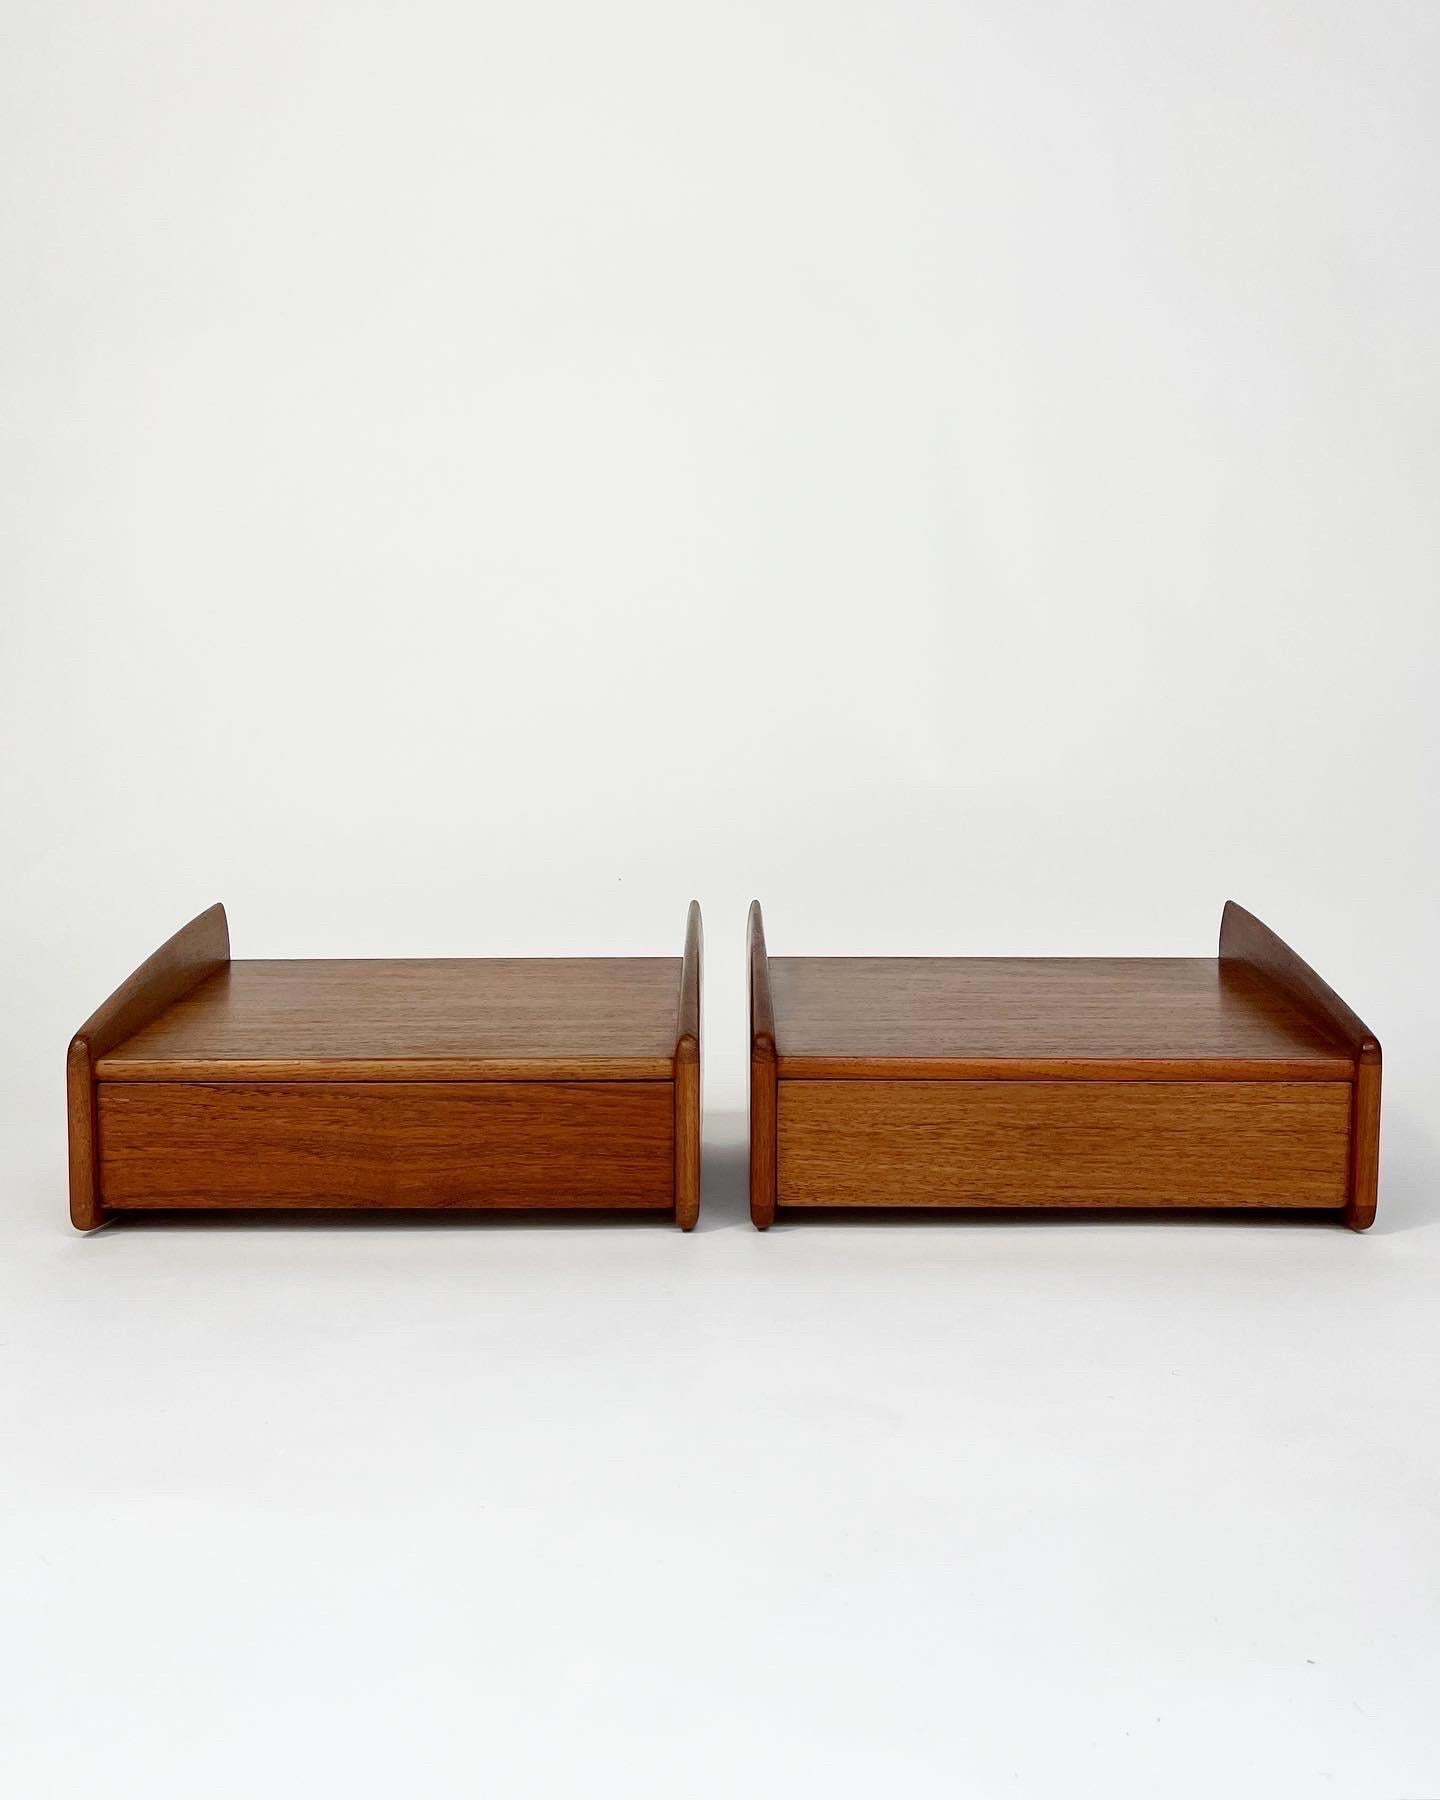 Pair of very well crafted floating nightstands in teak by Melvin Mikkelsen, made in Denmark in the 1960s. 

The wood has been cleaned and oiled, very good condition. 

Width: 36 cm
Depth: 27 cm
Heigth: 17 cm